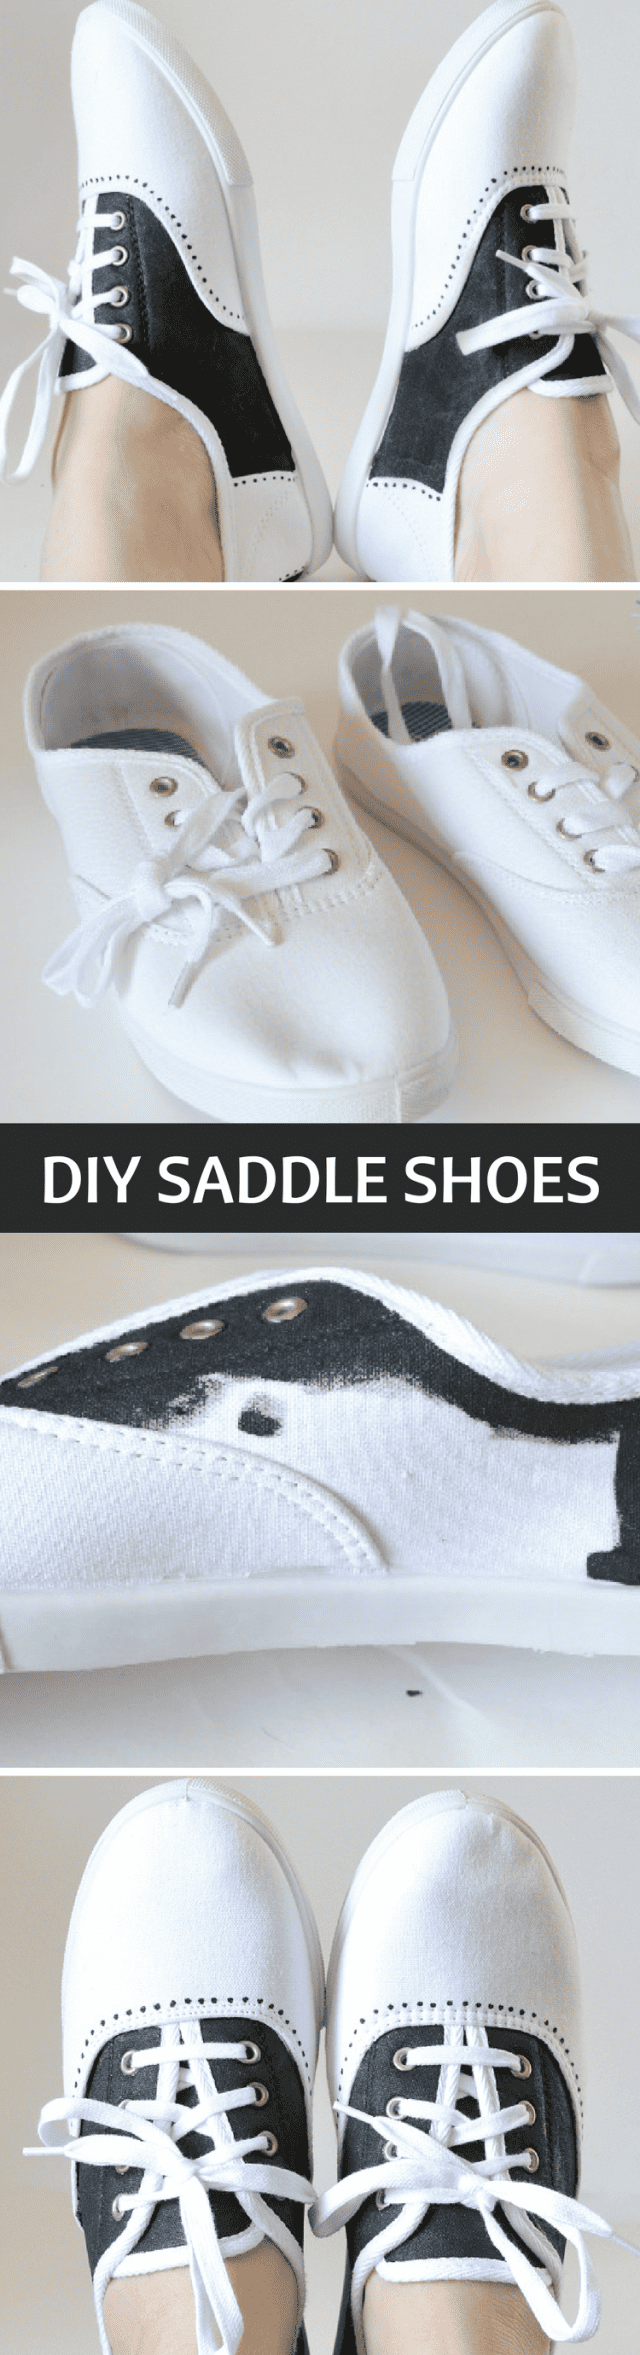 Saddle Shoes Craft for Halloween Costume